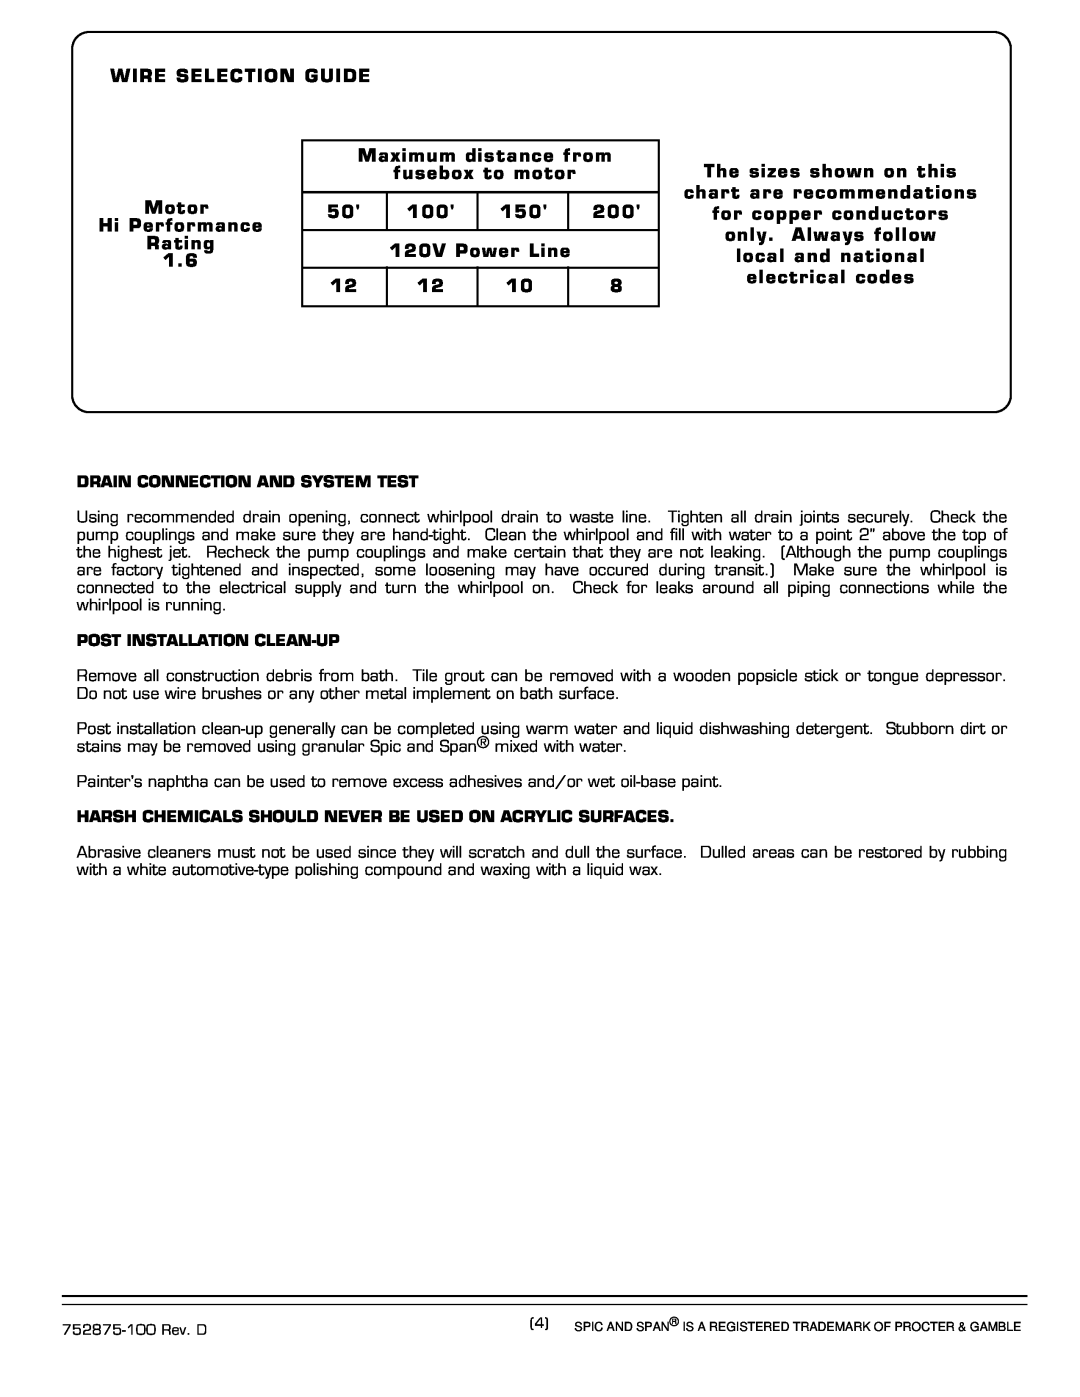 American Standard 2425E SERIES installation instructions Wire Selection Guide 